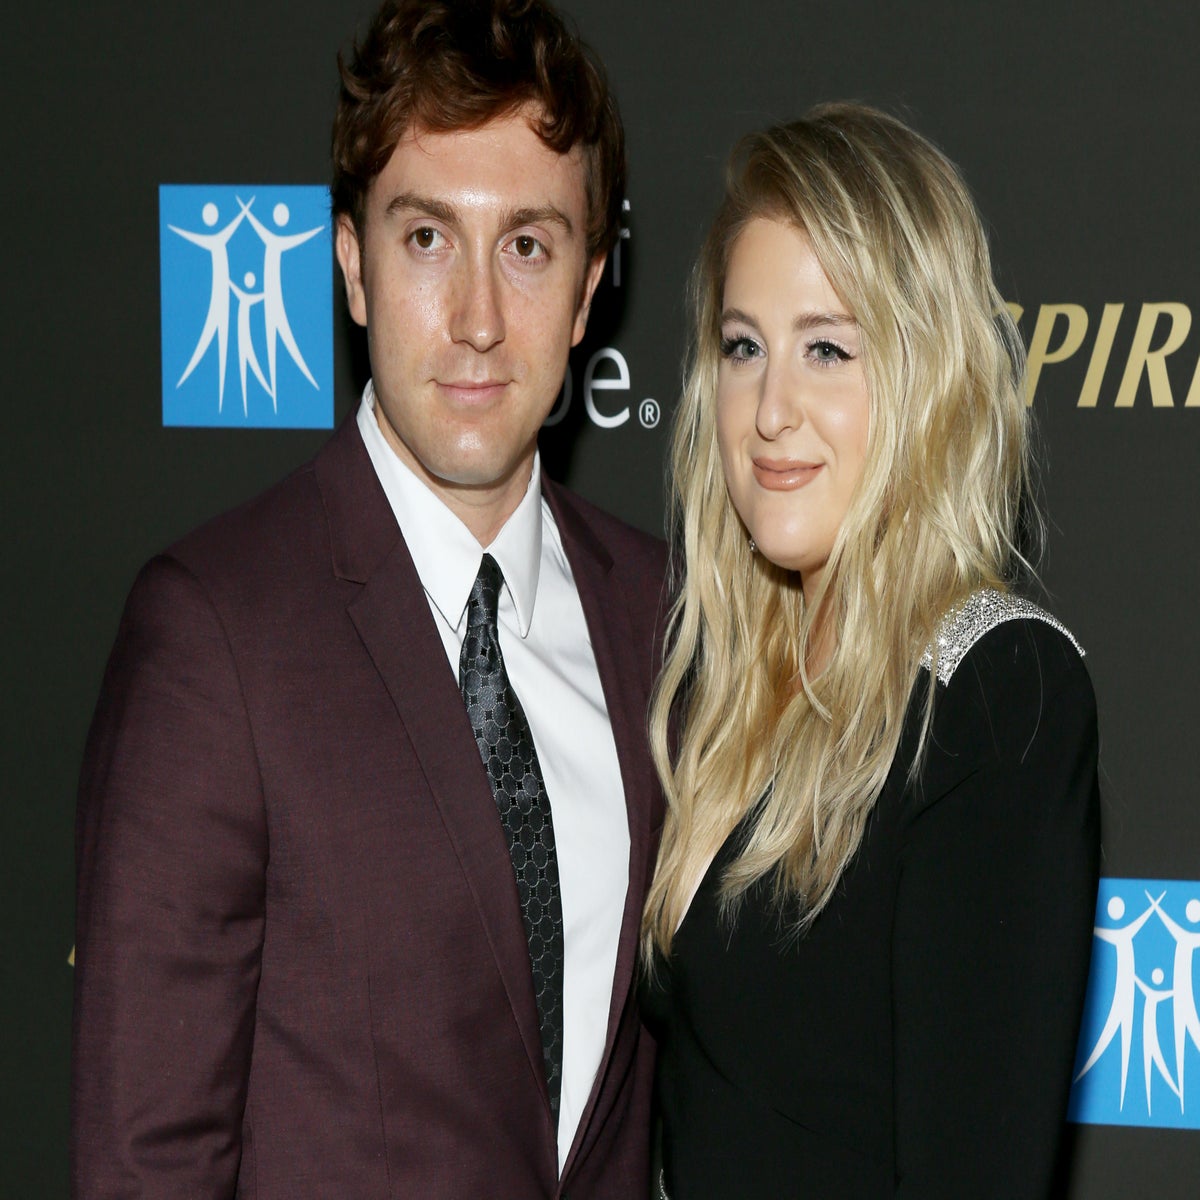 Meghan Trainor and husband Daryl Sabara welcome second child with